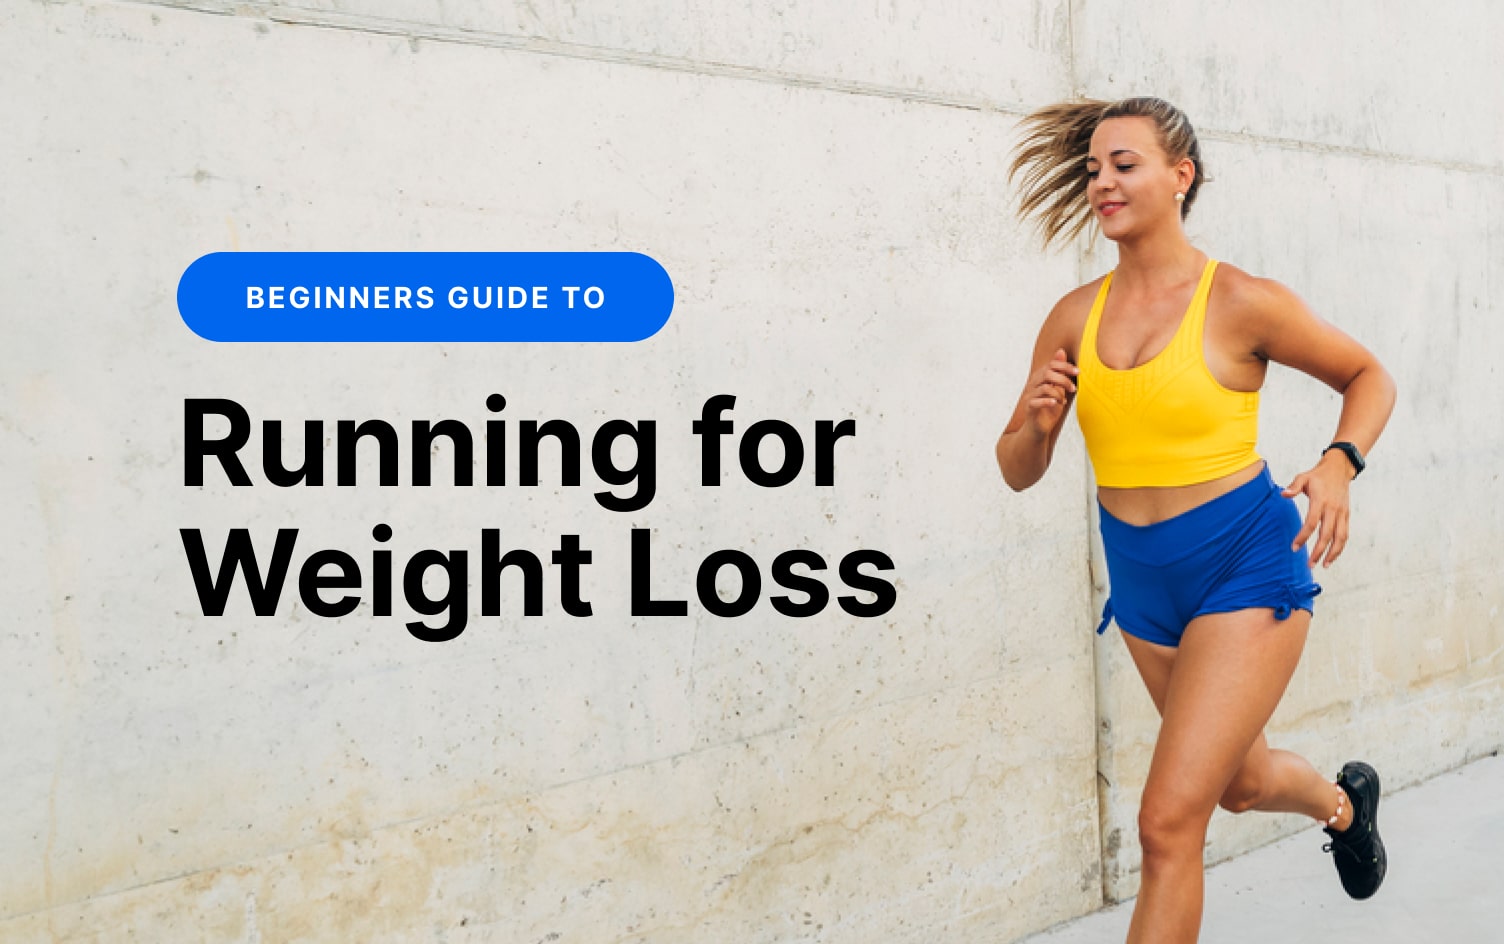 Jogging Tips for Beginners to Lose Weight - Hey Simply